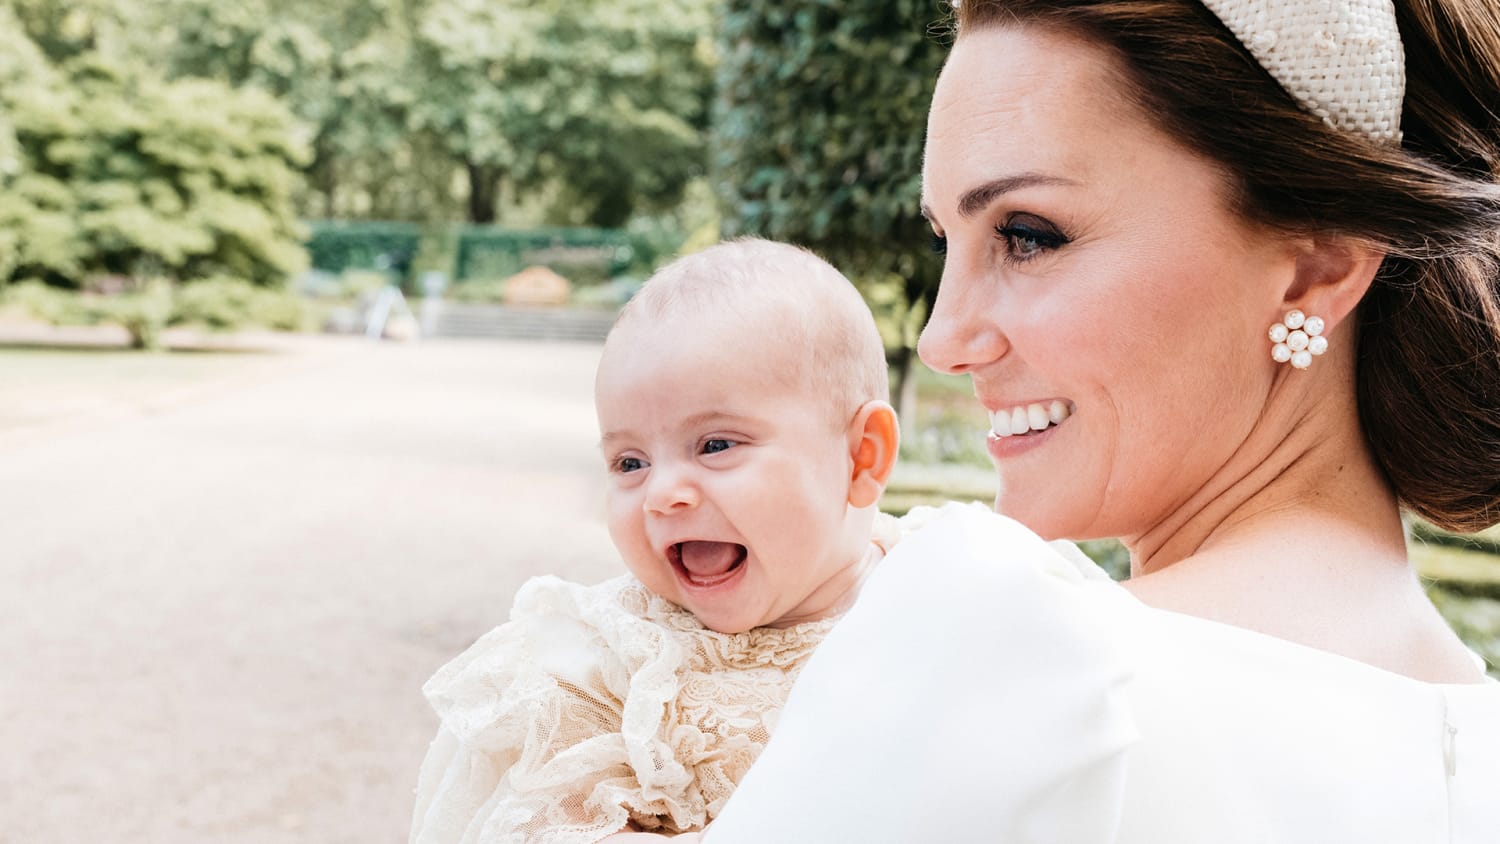 Palace releases sweet bonus photo of Prince Louis and former Kate Middleton at christening ...